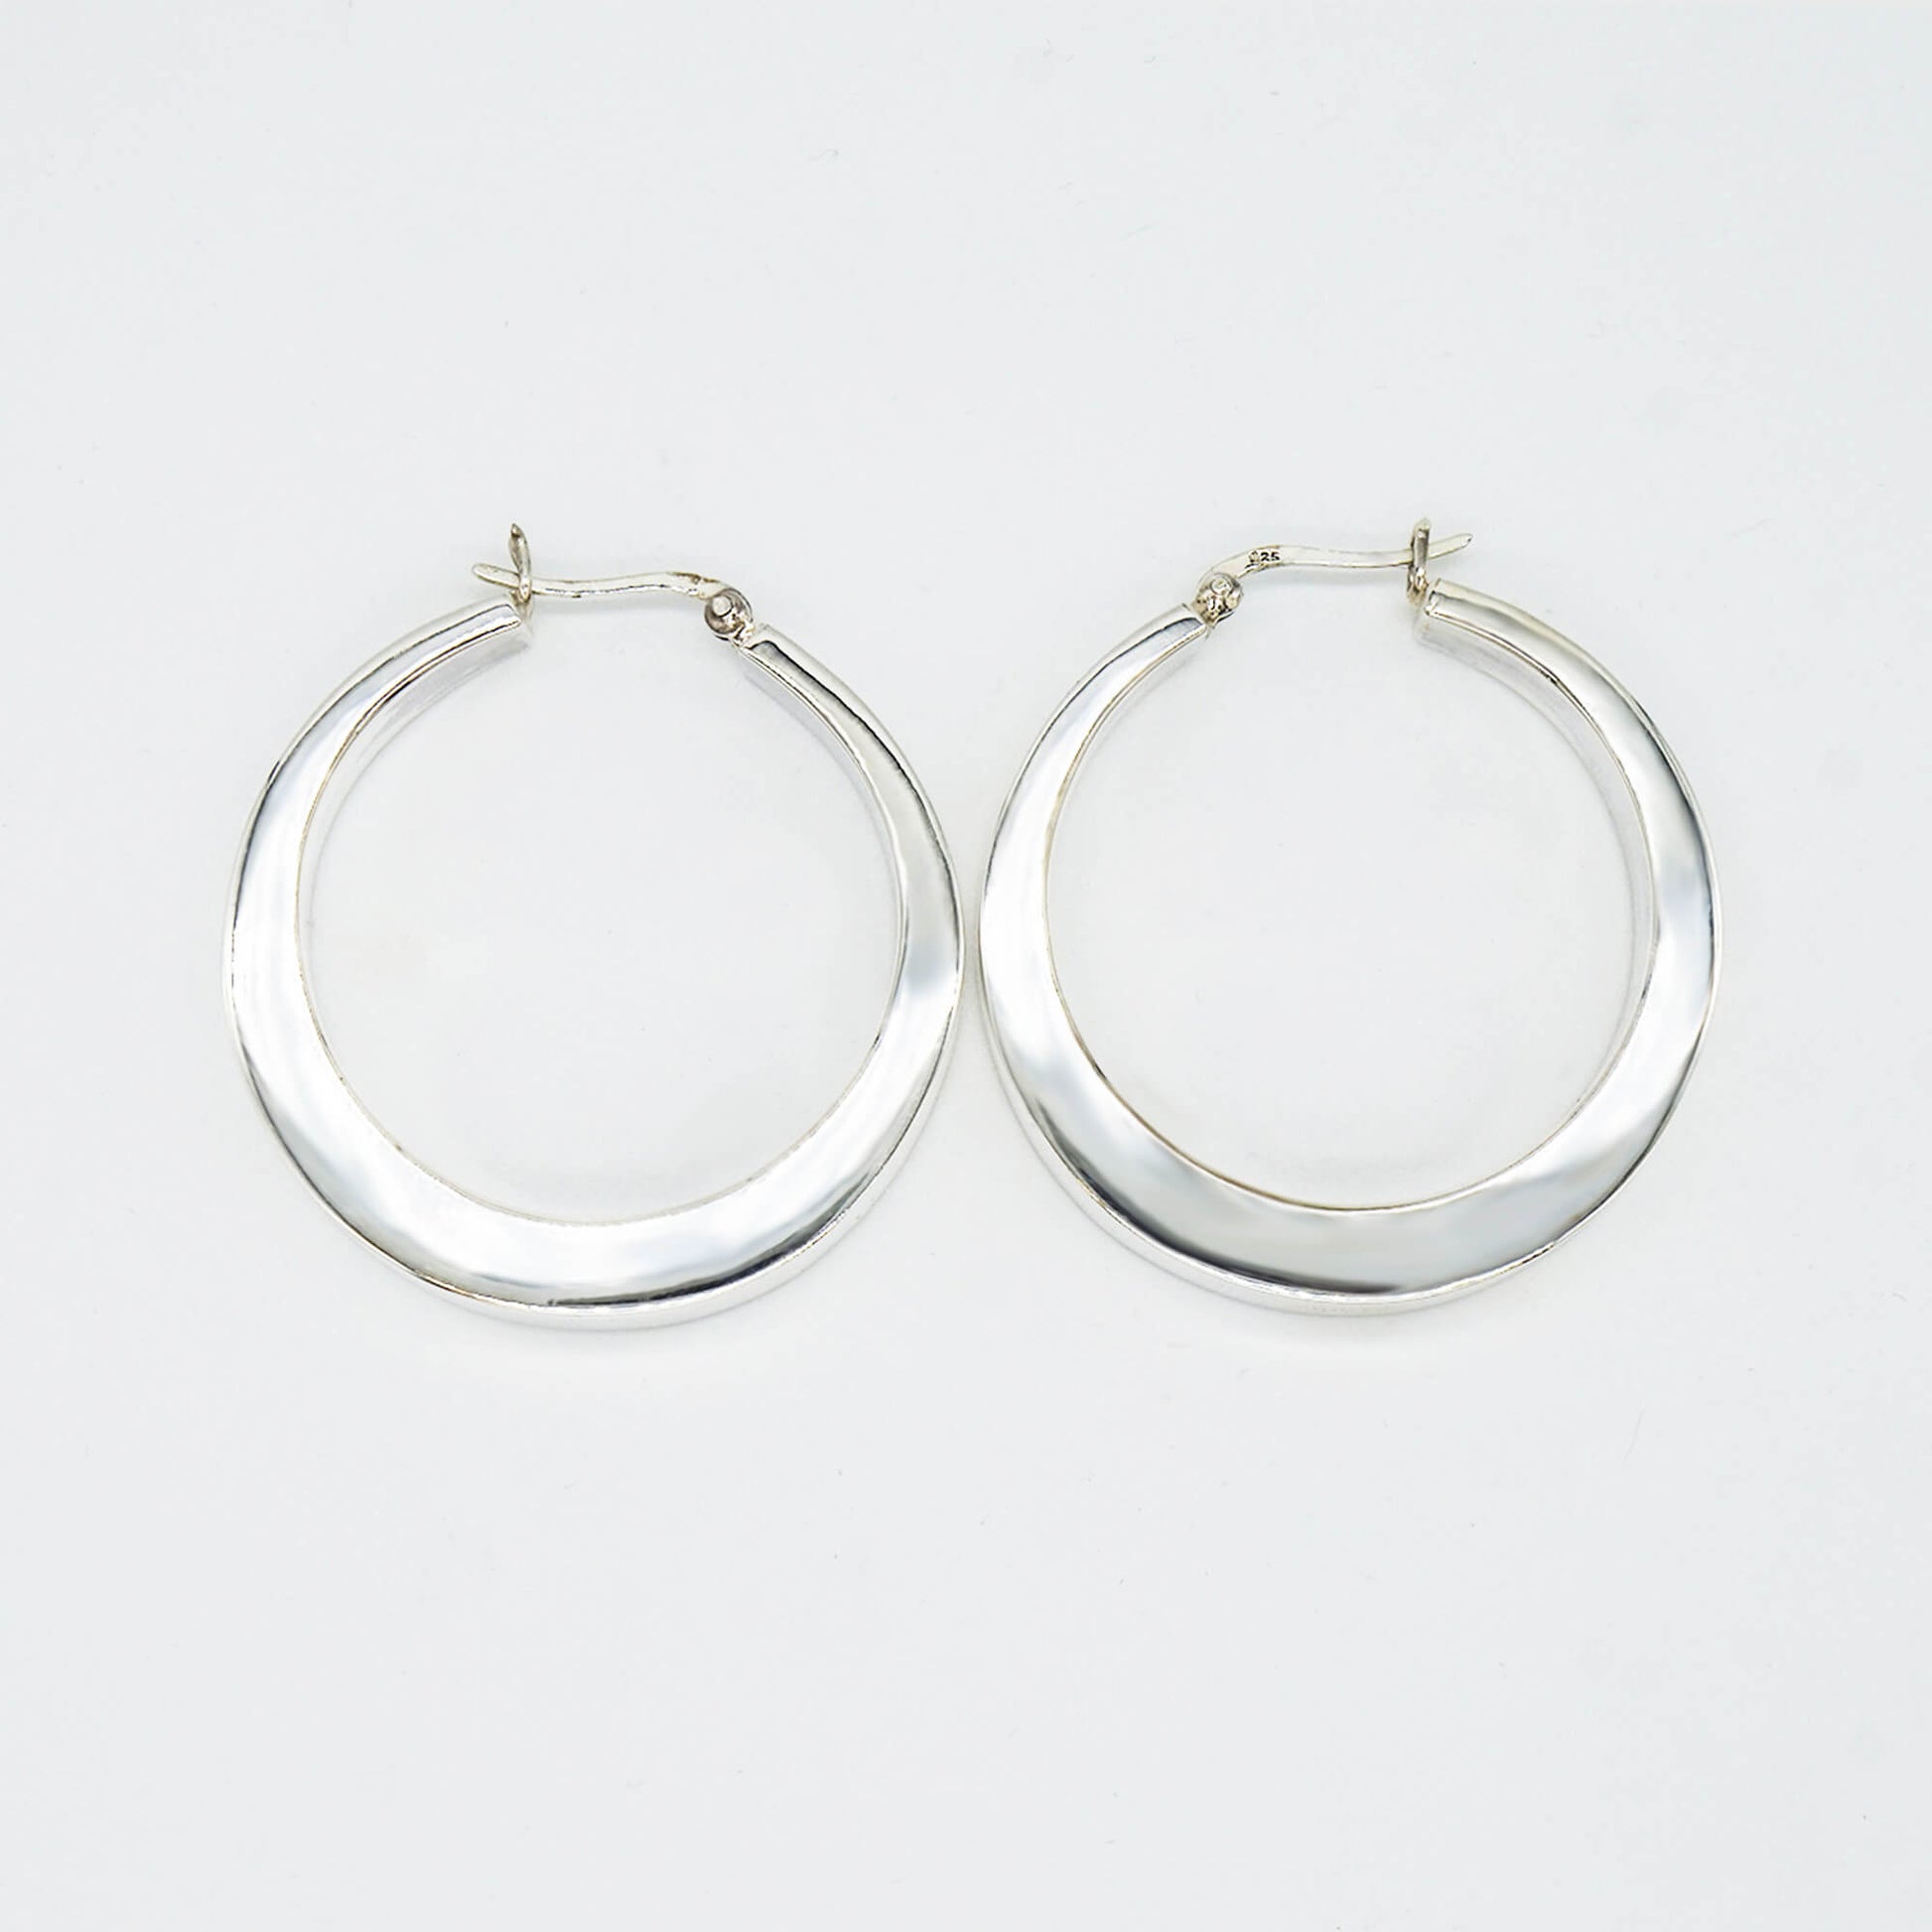 PAIR SILVER HOLLOW SQUARED OFF HOOPS.